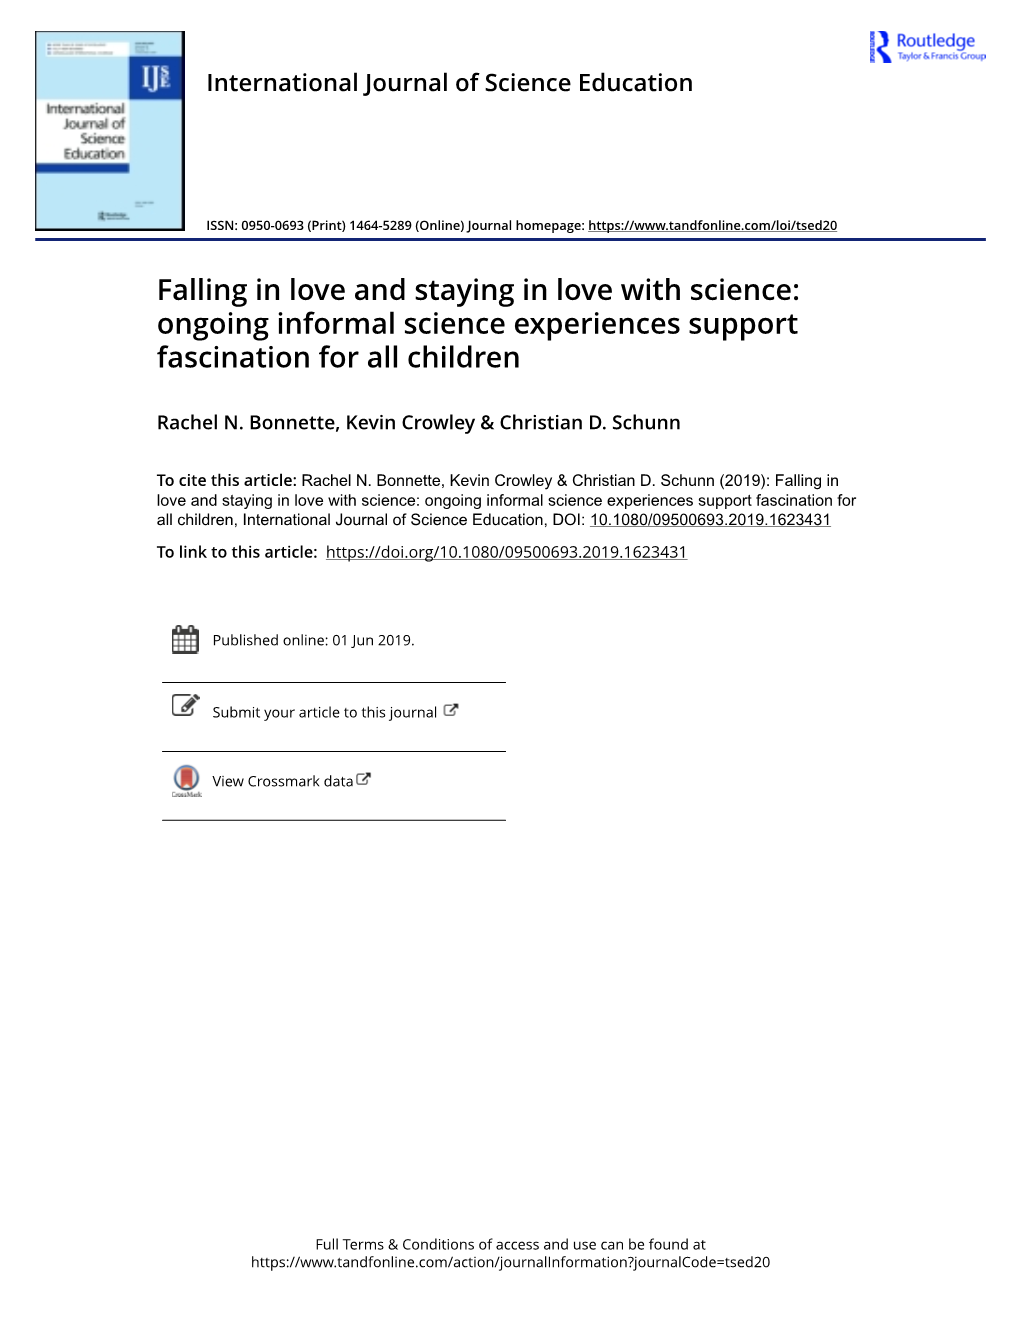 Ongoing Informal Science Experiences Support Fascination for All Children